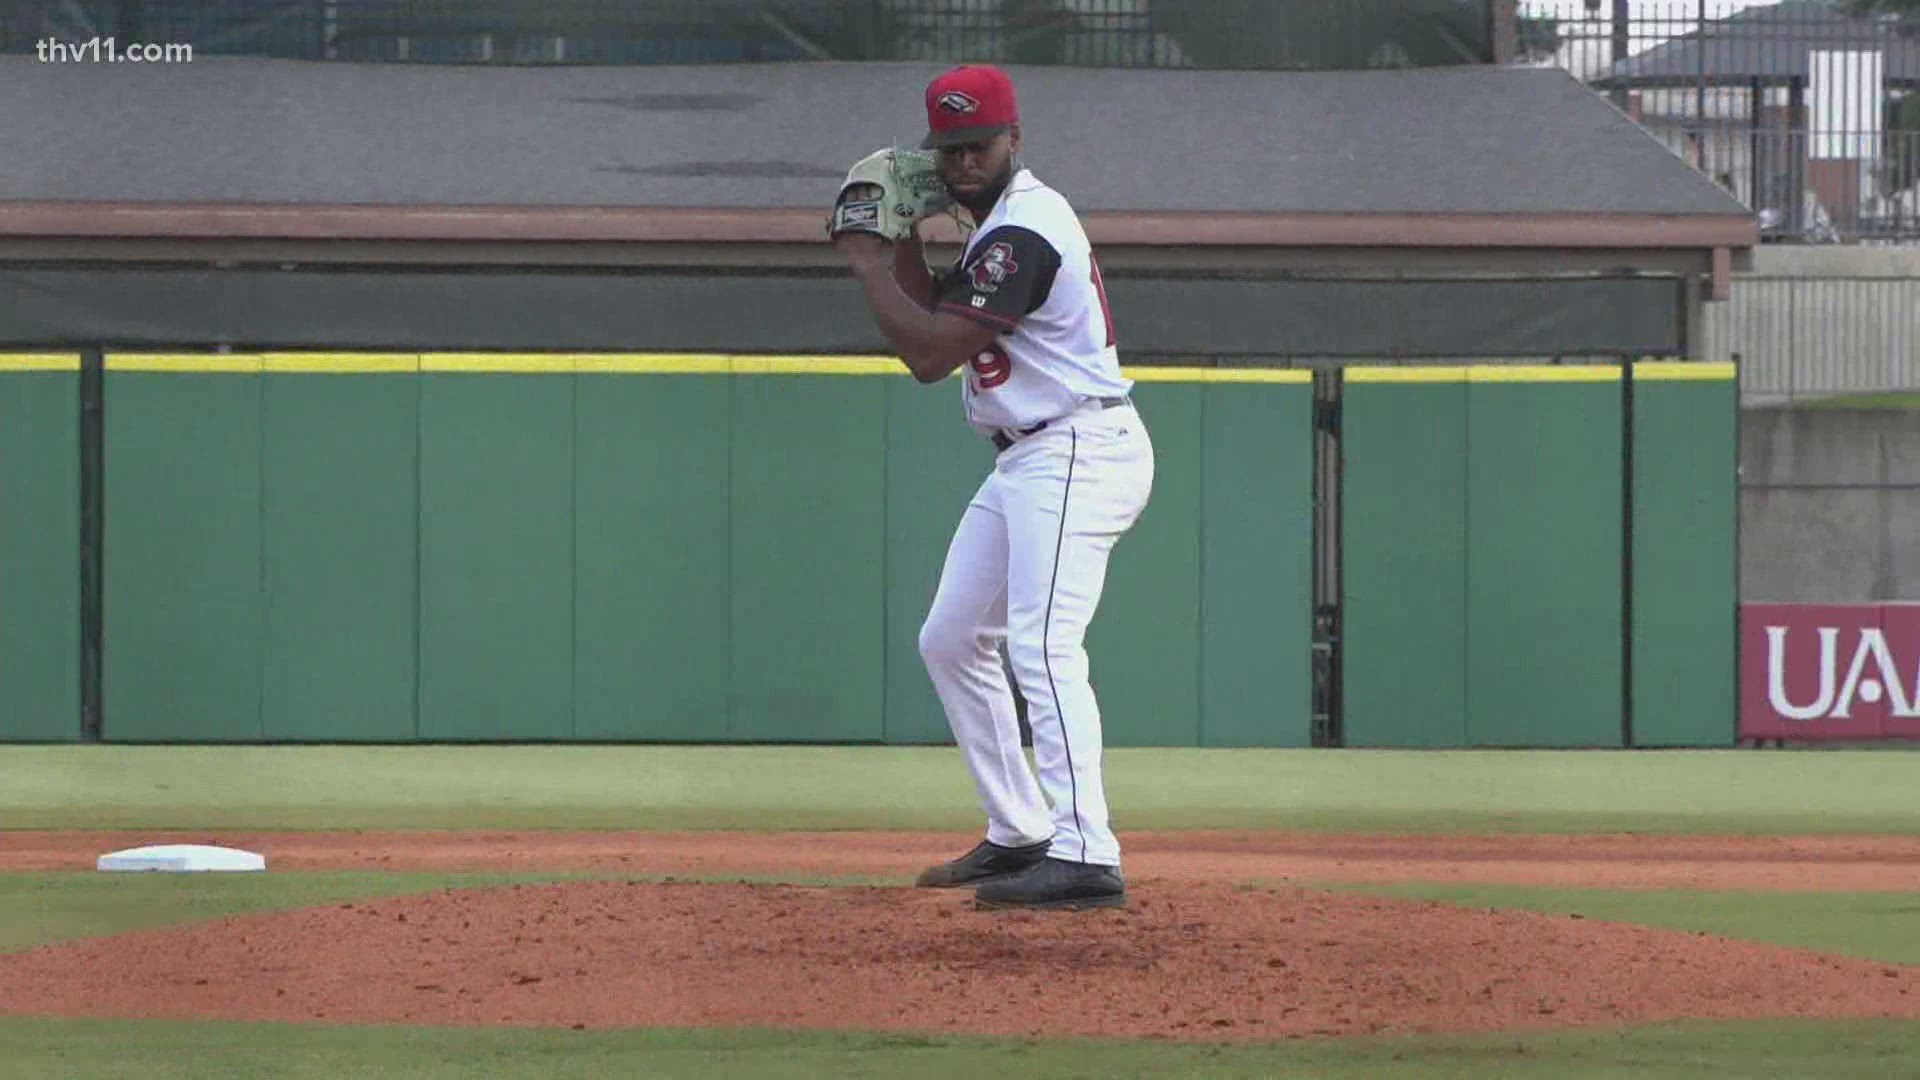 The Arkansas Travelers tied the game in the 7th after falling behind by four early